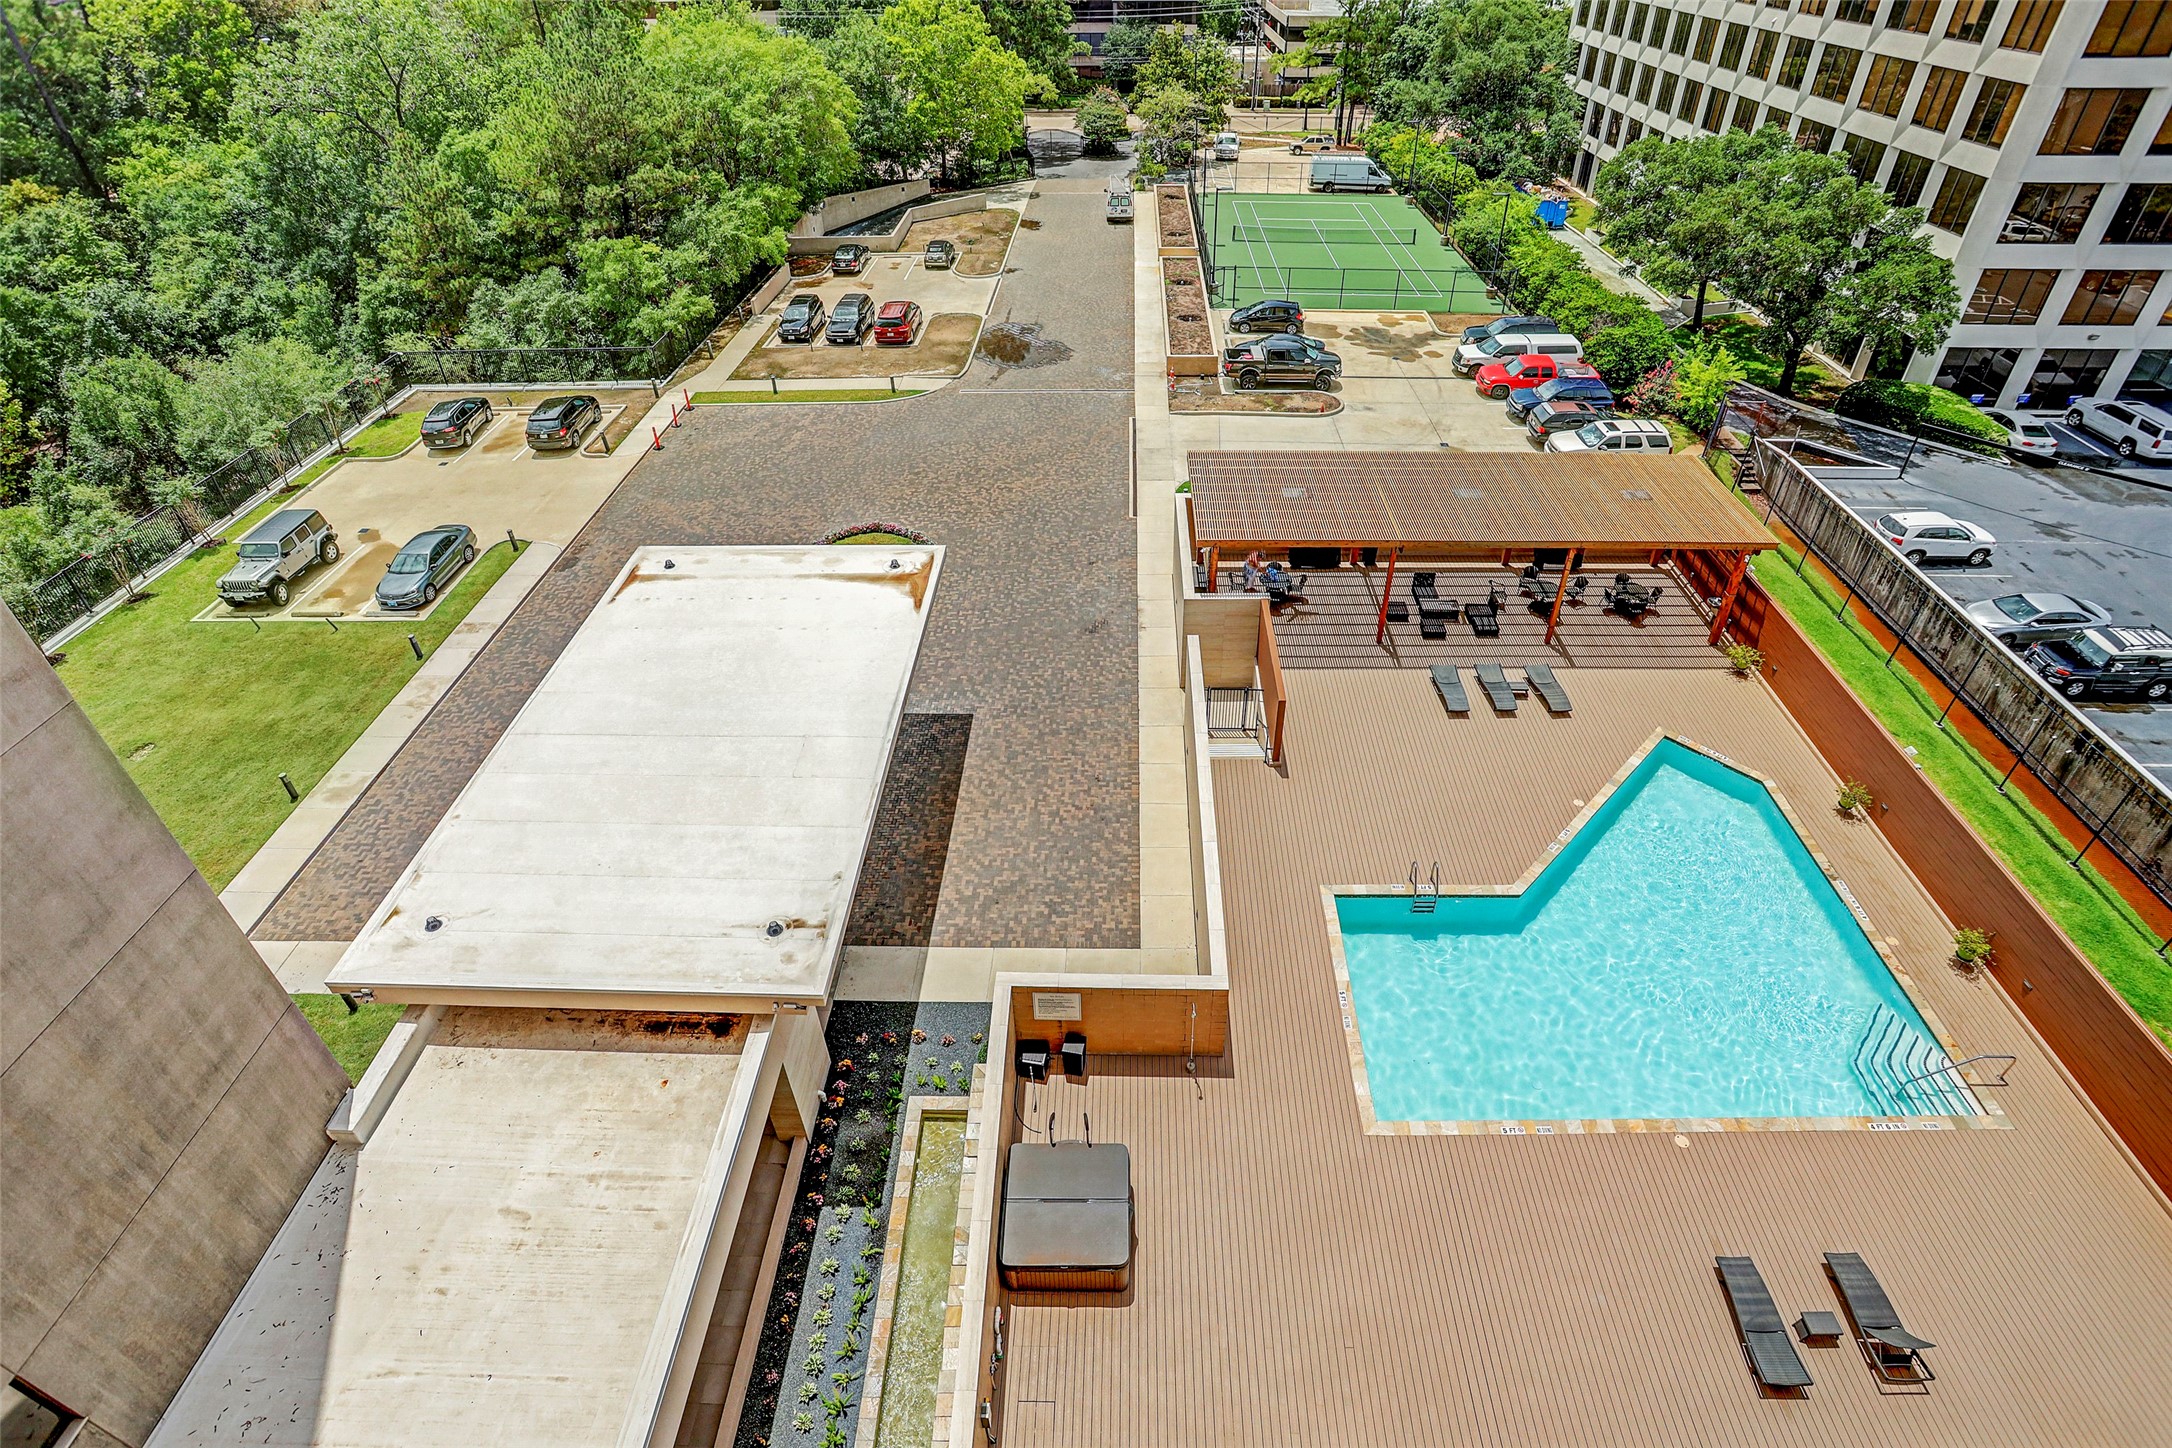 Aerial view of the outdoor amenities Park Square has to offer.